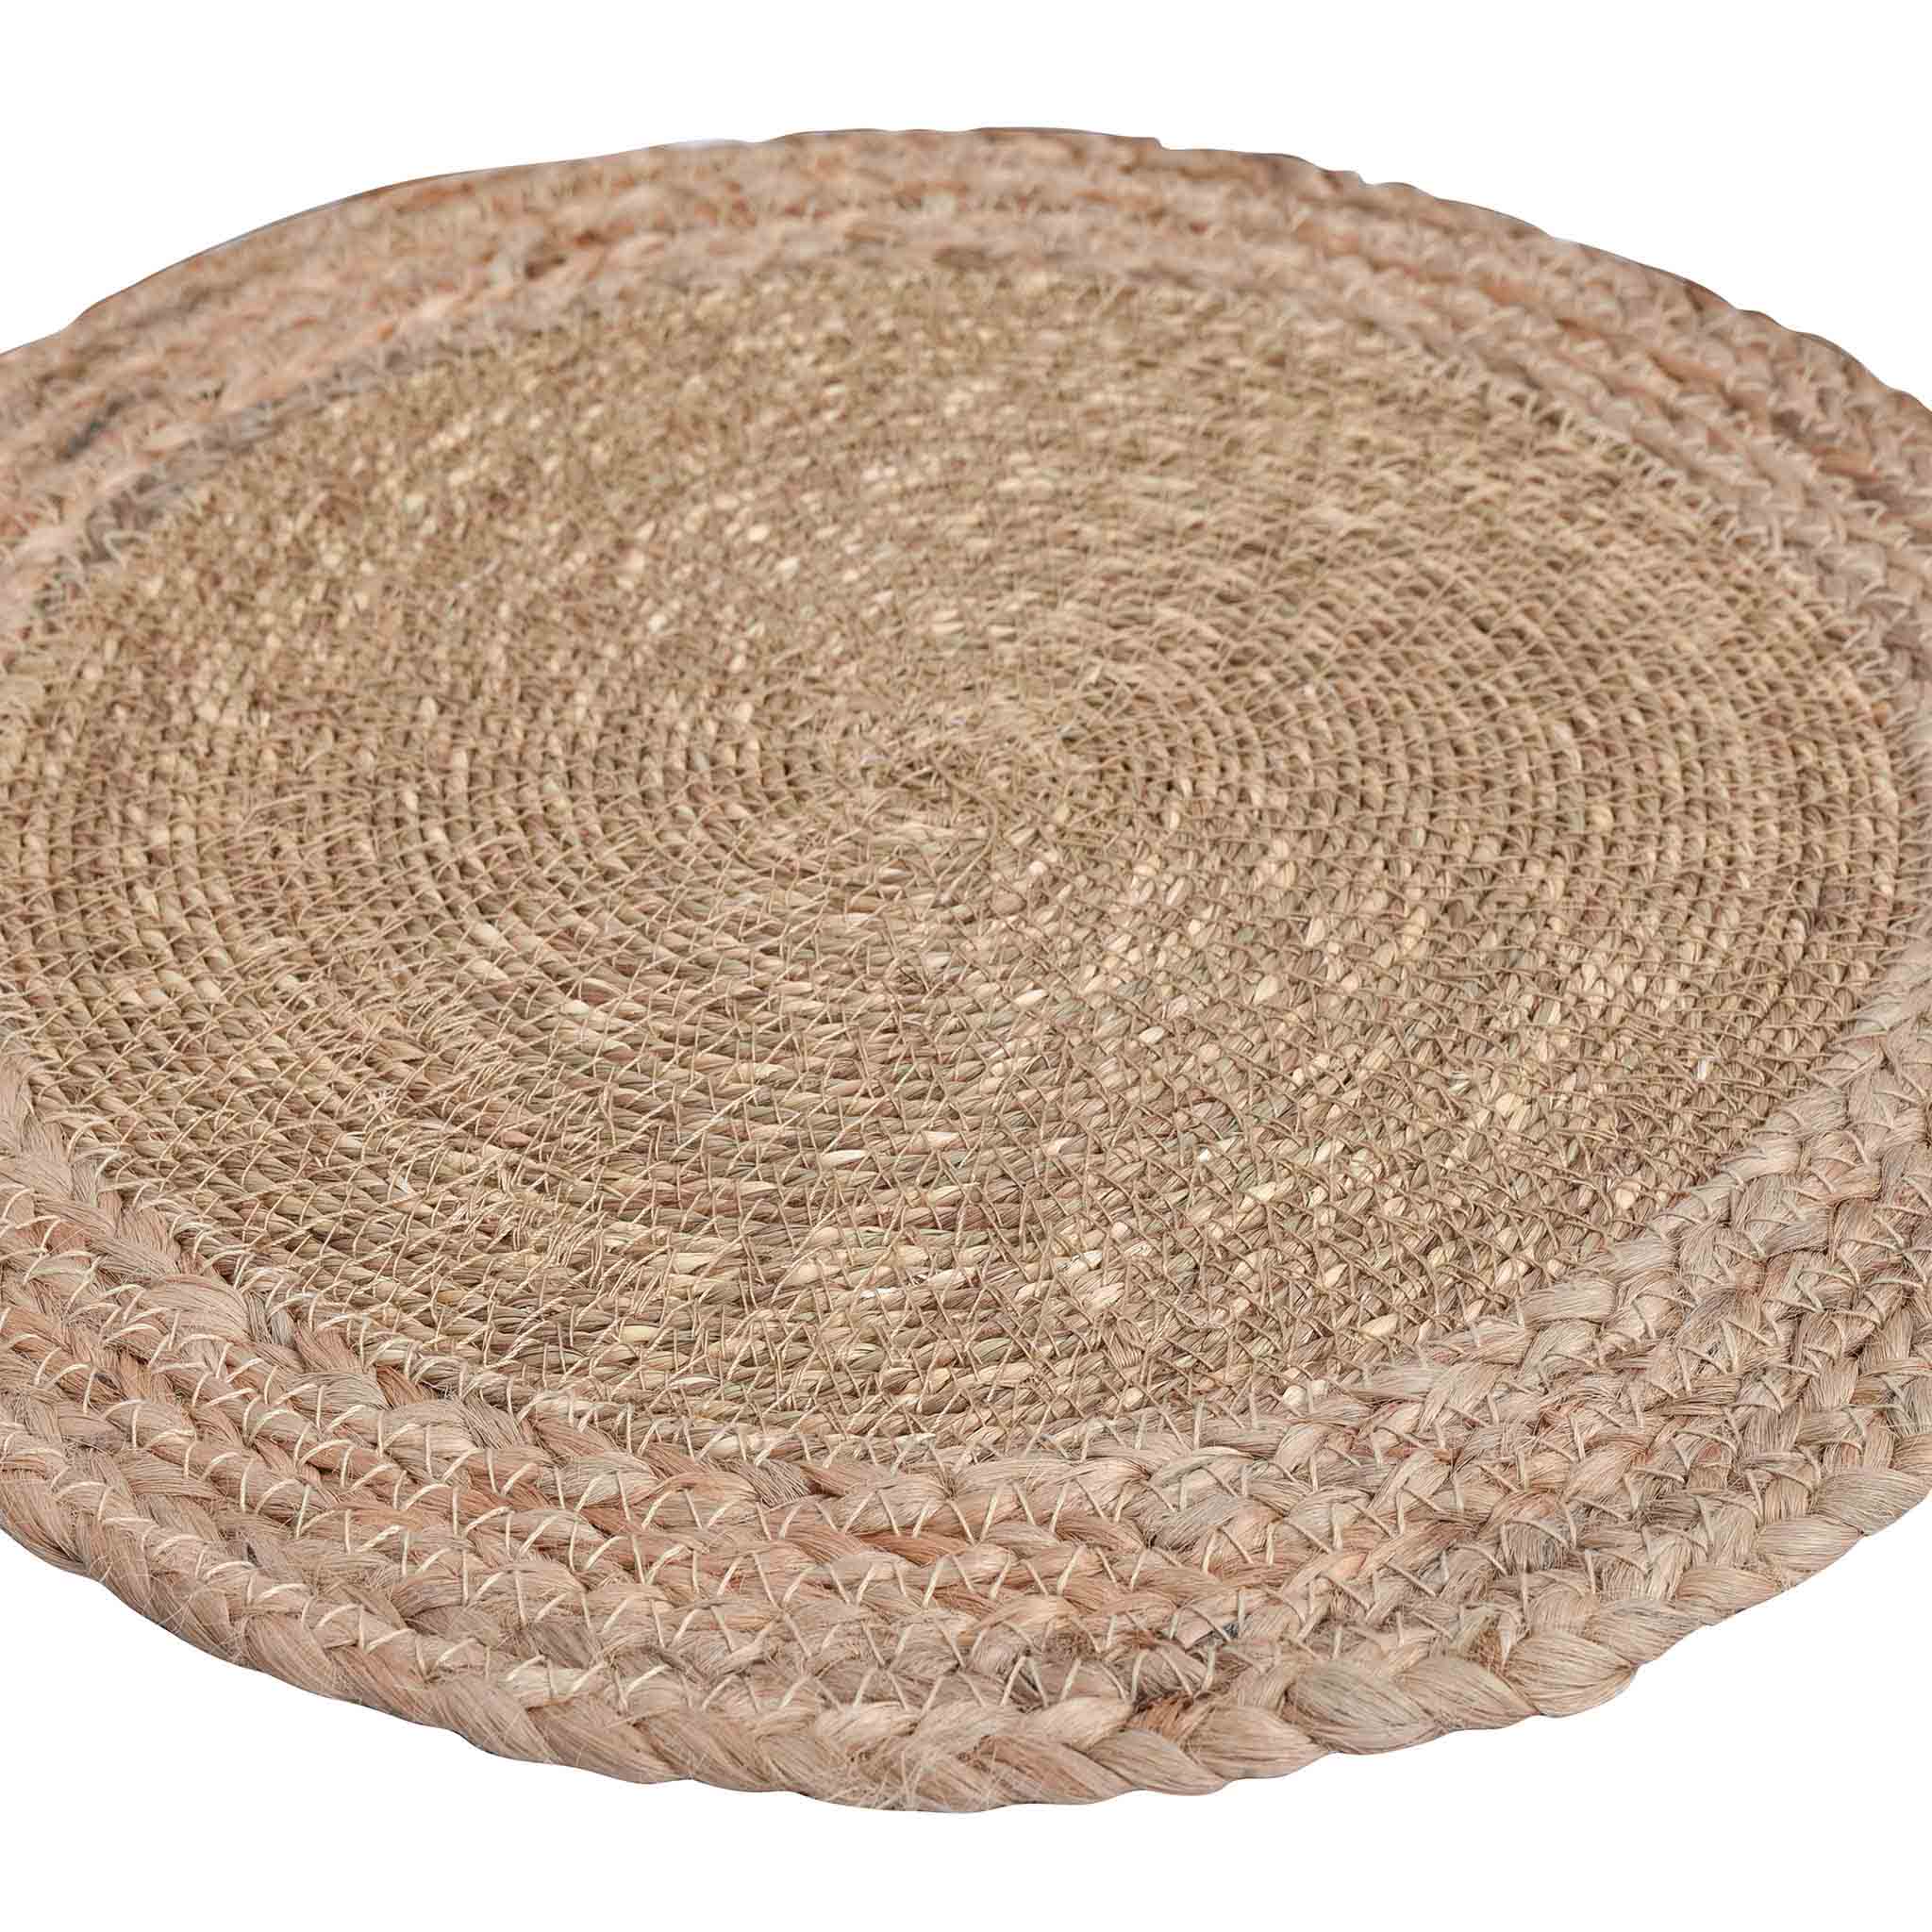 Braided Jute Placemat in Natural, Set of 2/4